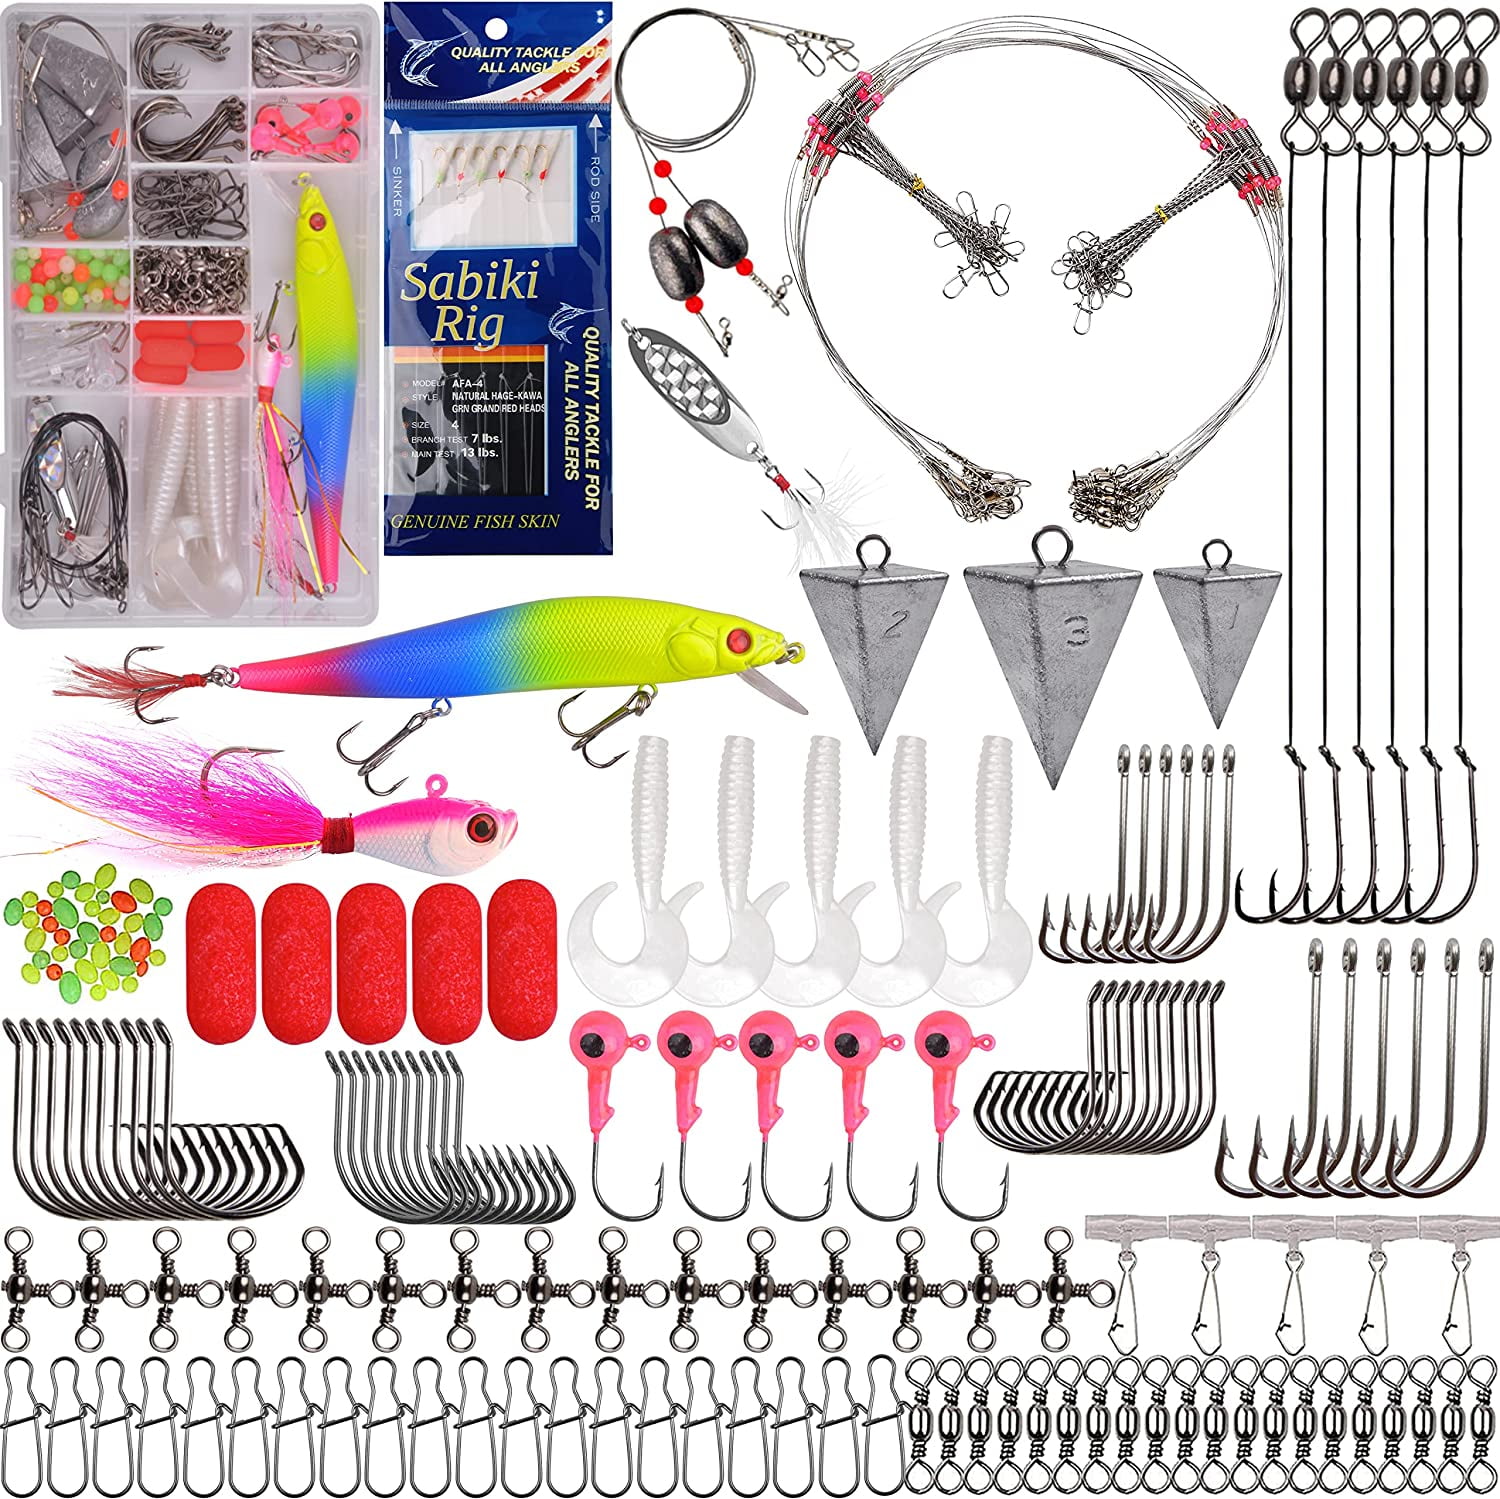 Surf Fishing Rig Kit 160pcs Saltwater Ocean Fishing Gear Rigs Minnow Lures  Spoon Bucktail Jig Fishing Weights Tackle Box - Fishing Tackle Boxes -  AliExpress